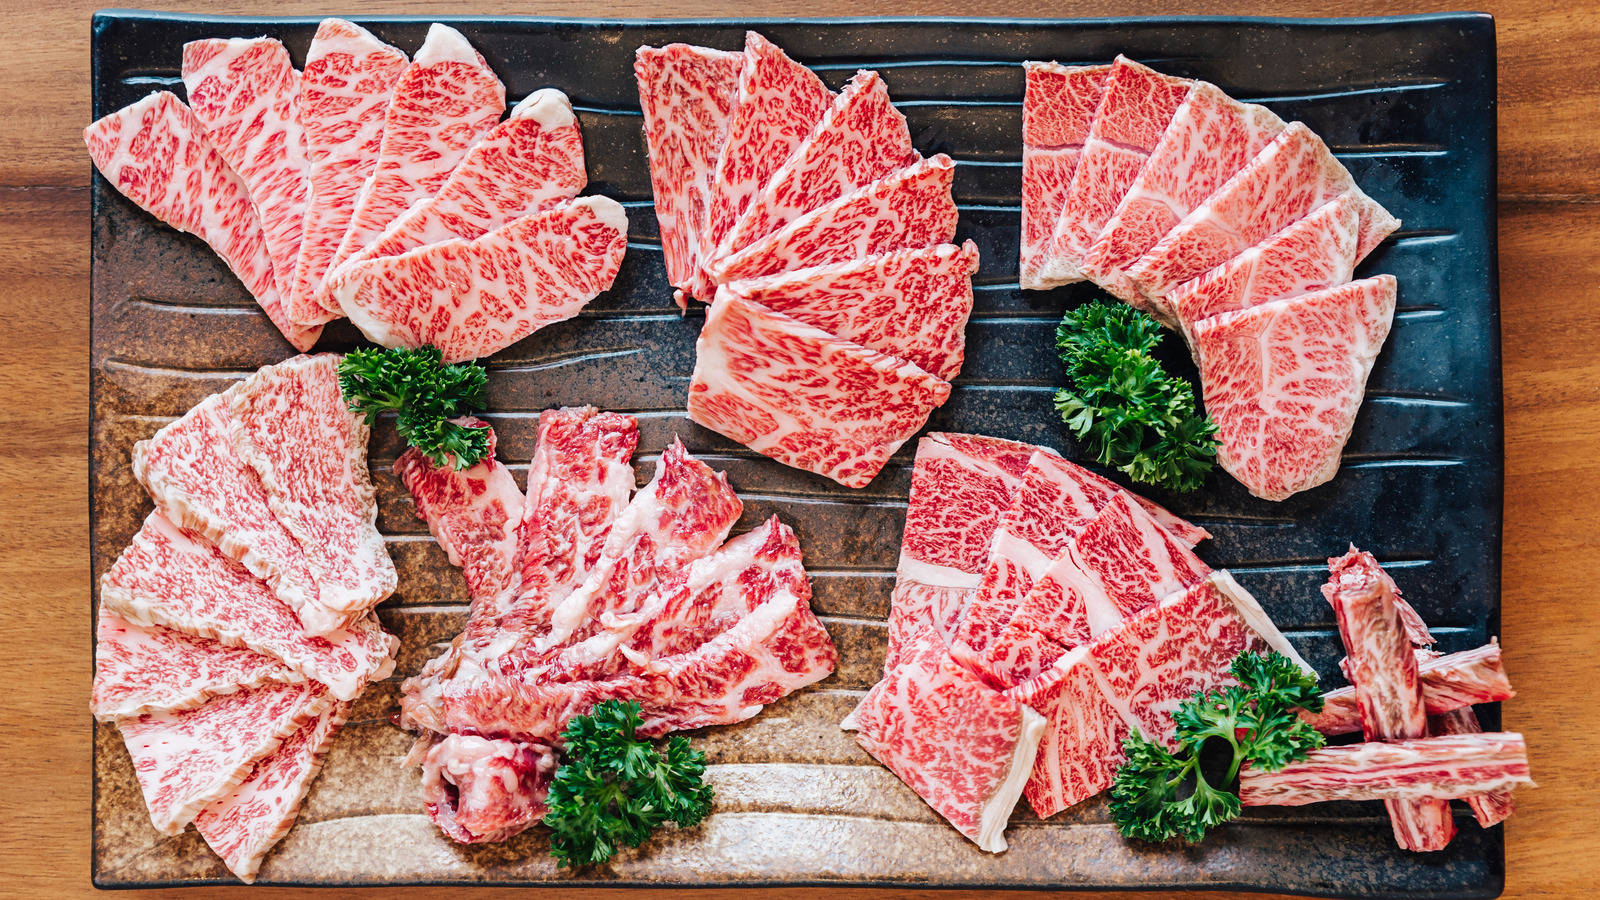 Exquisite Kobe Beef Cuts Finely Sliced Wallpaper